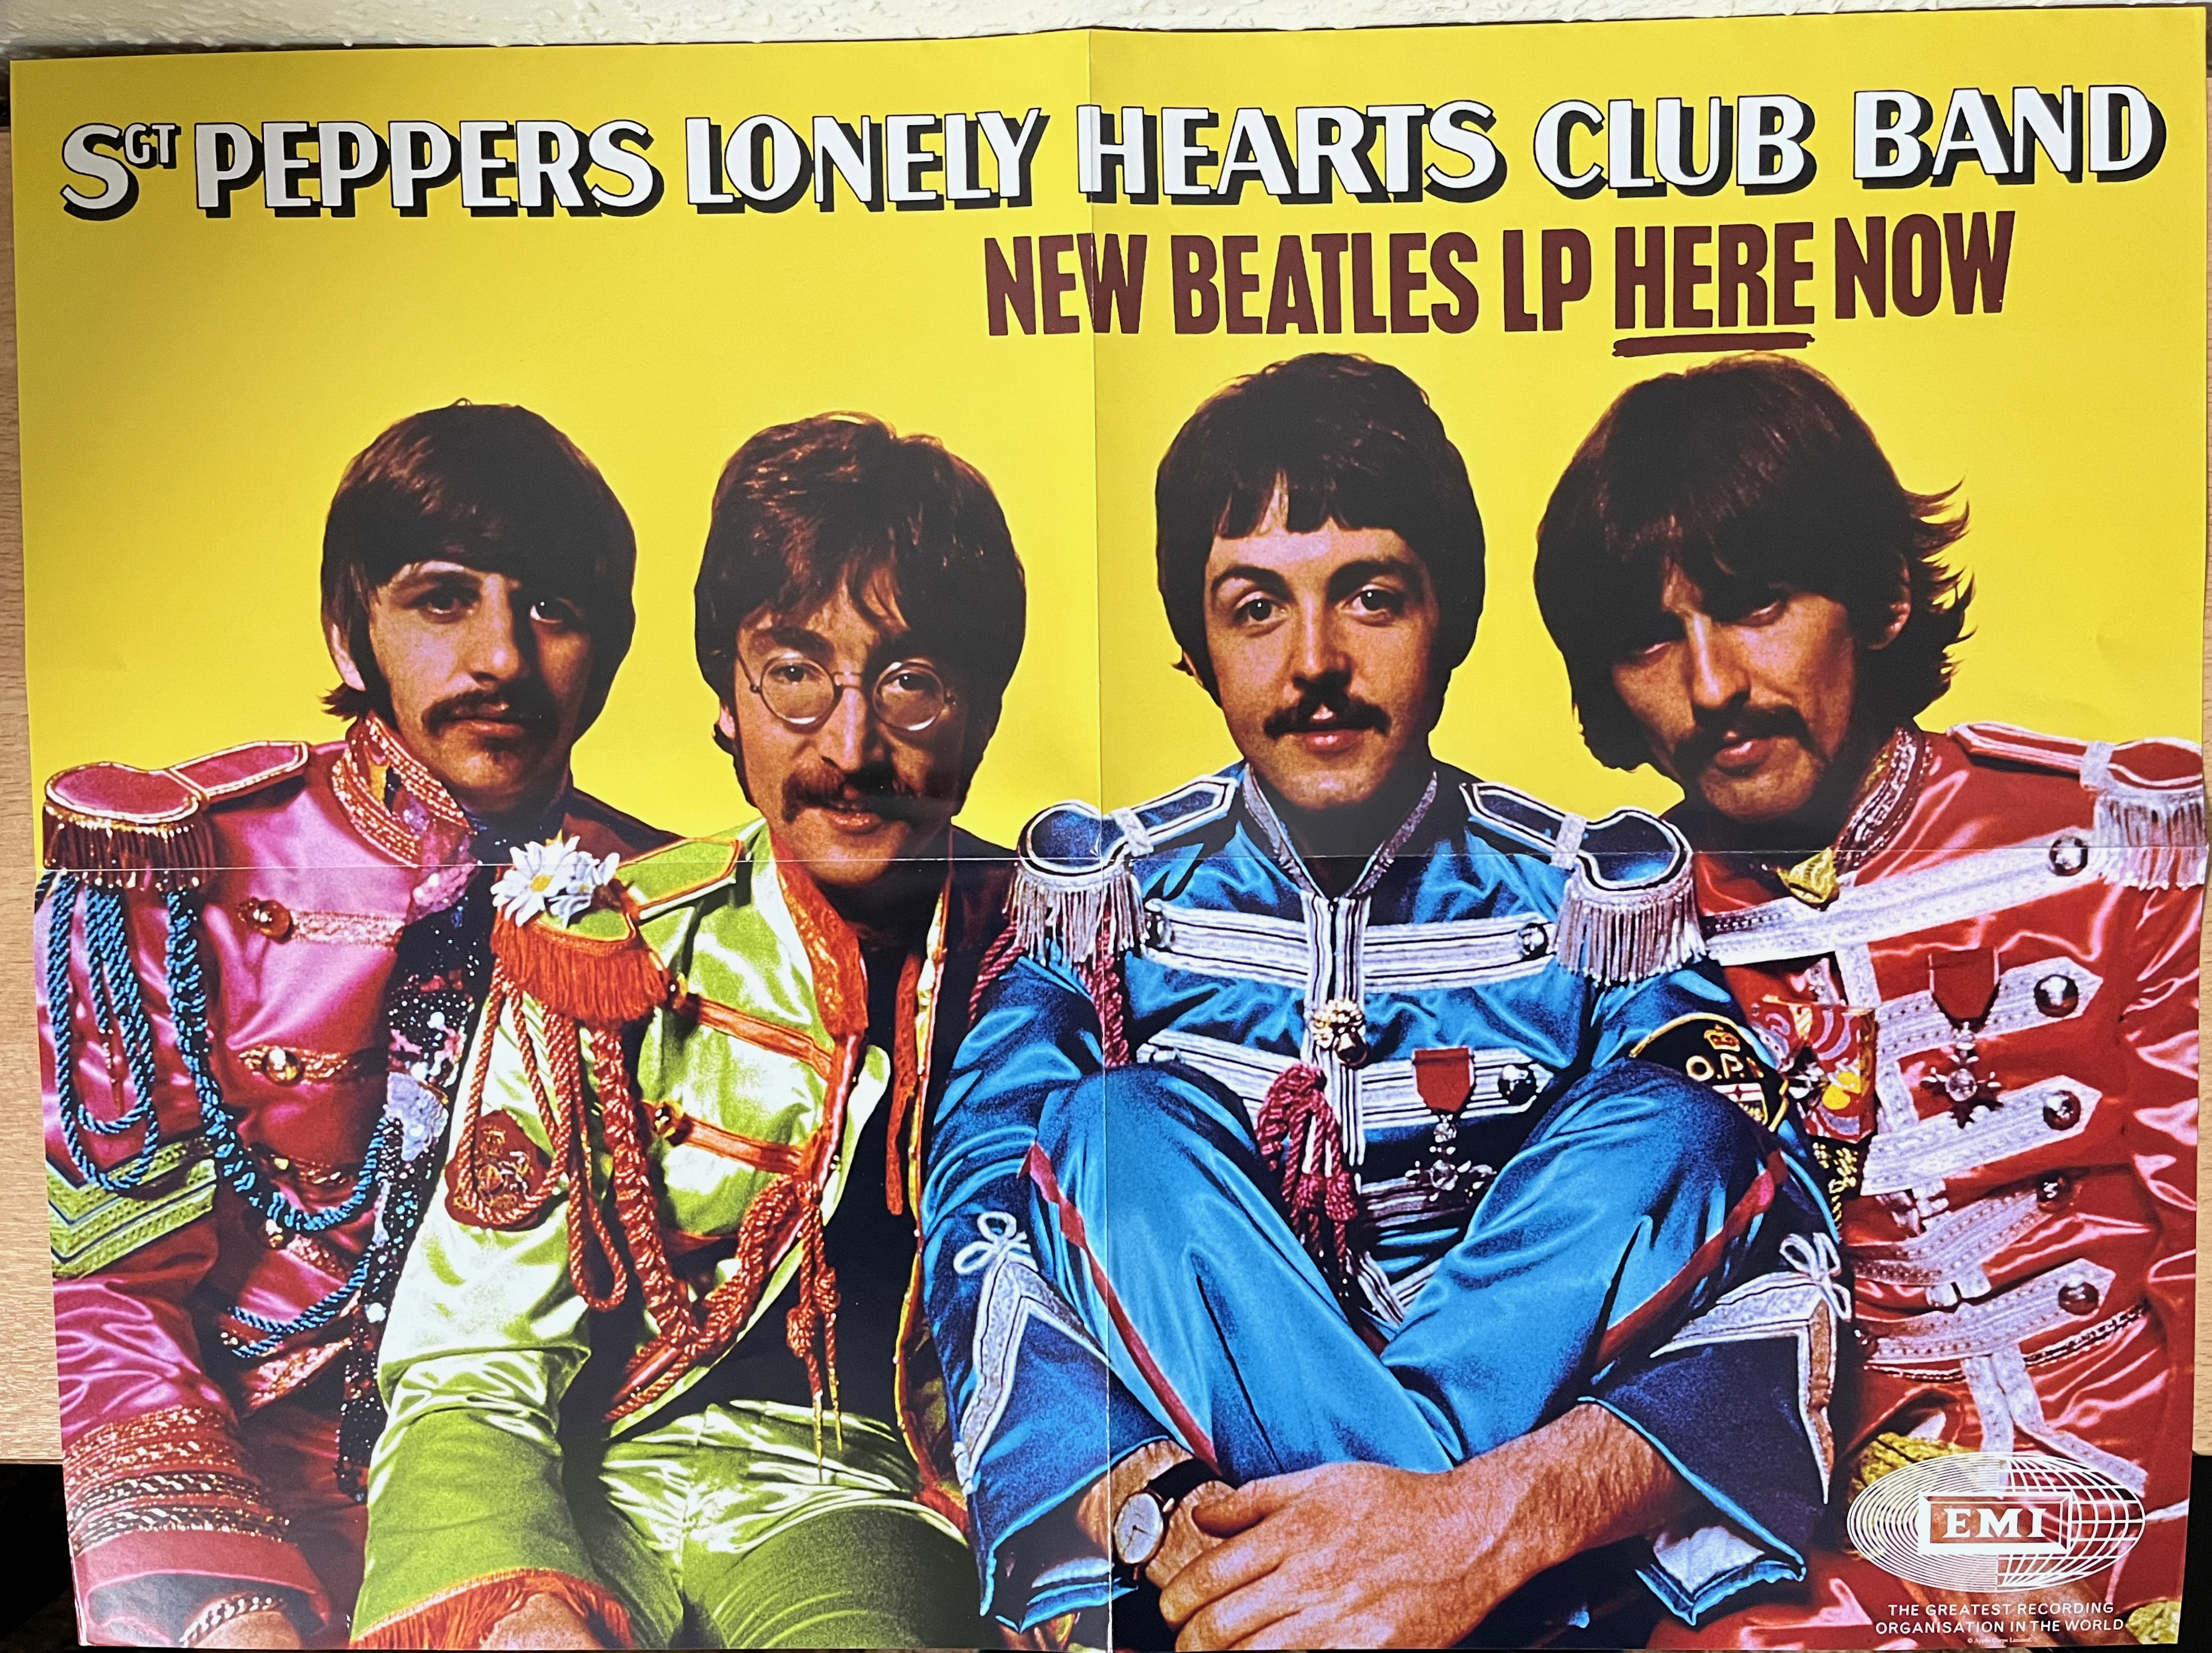 Poster of the 4 members of The Beatles, dressed in their ornately decorated pink, yellow, blue and red Sergeant Pepper outfits, against a yellow background, below the text Sergeant Pepper's Lonely Hearts Club Band, New Beatles LP here now.